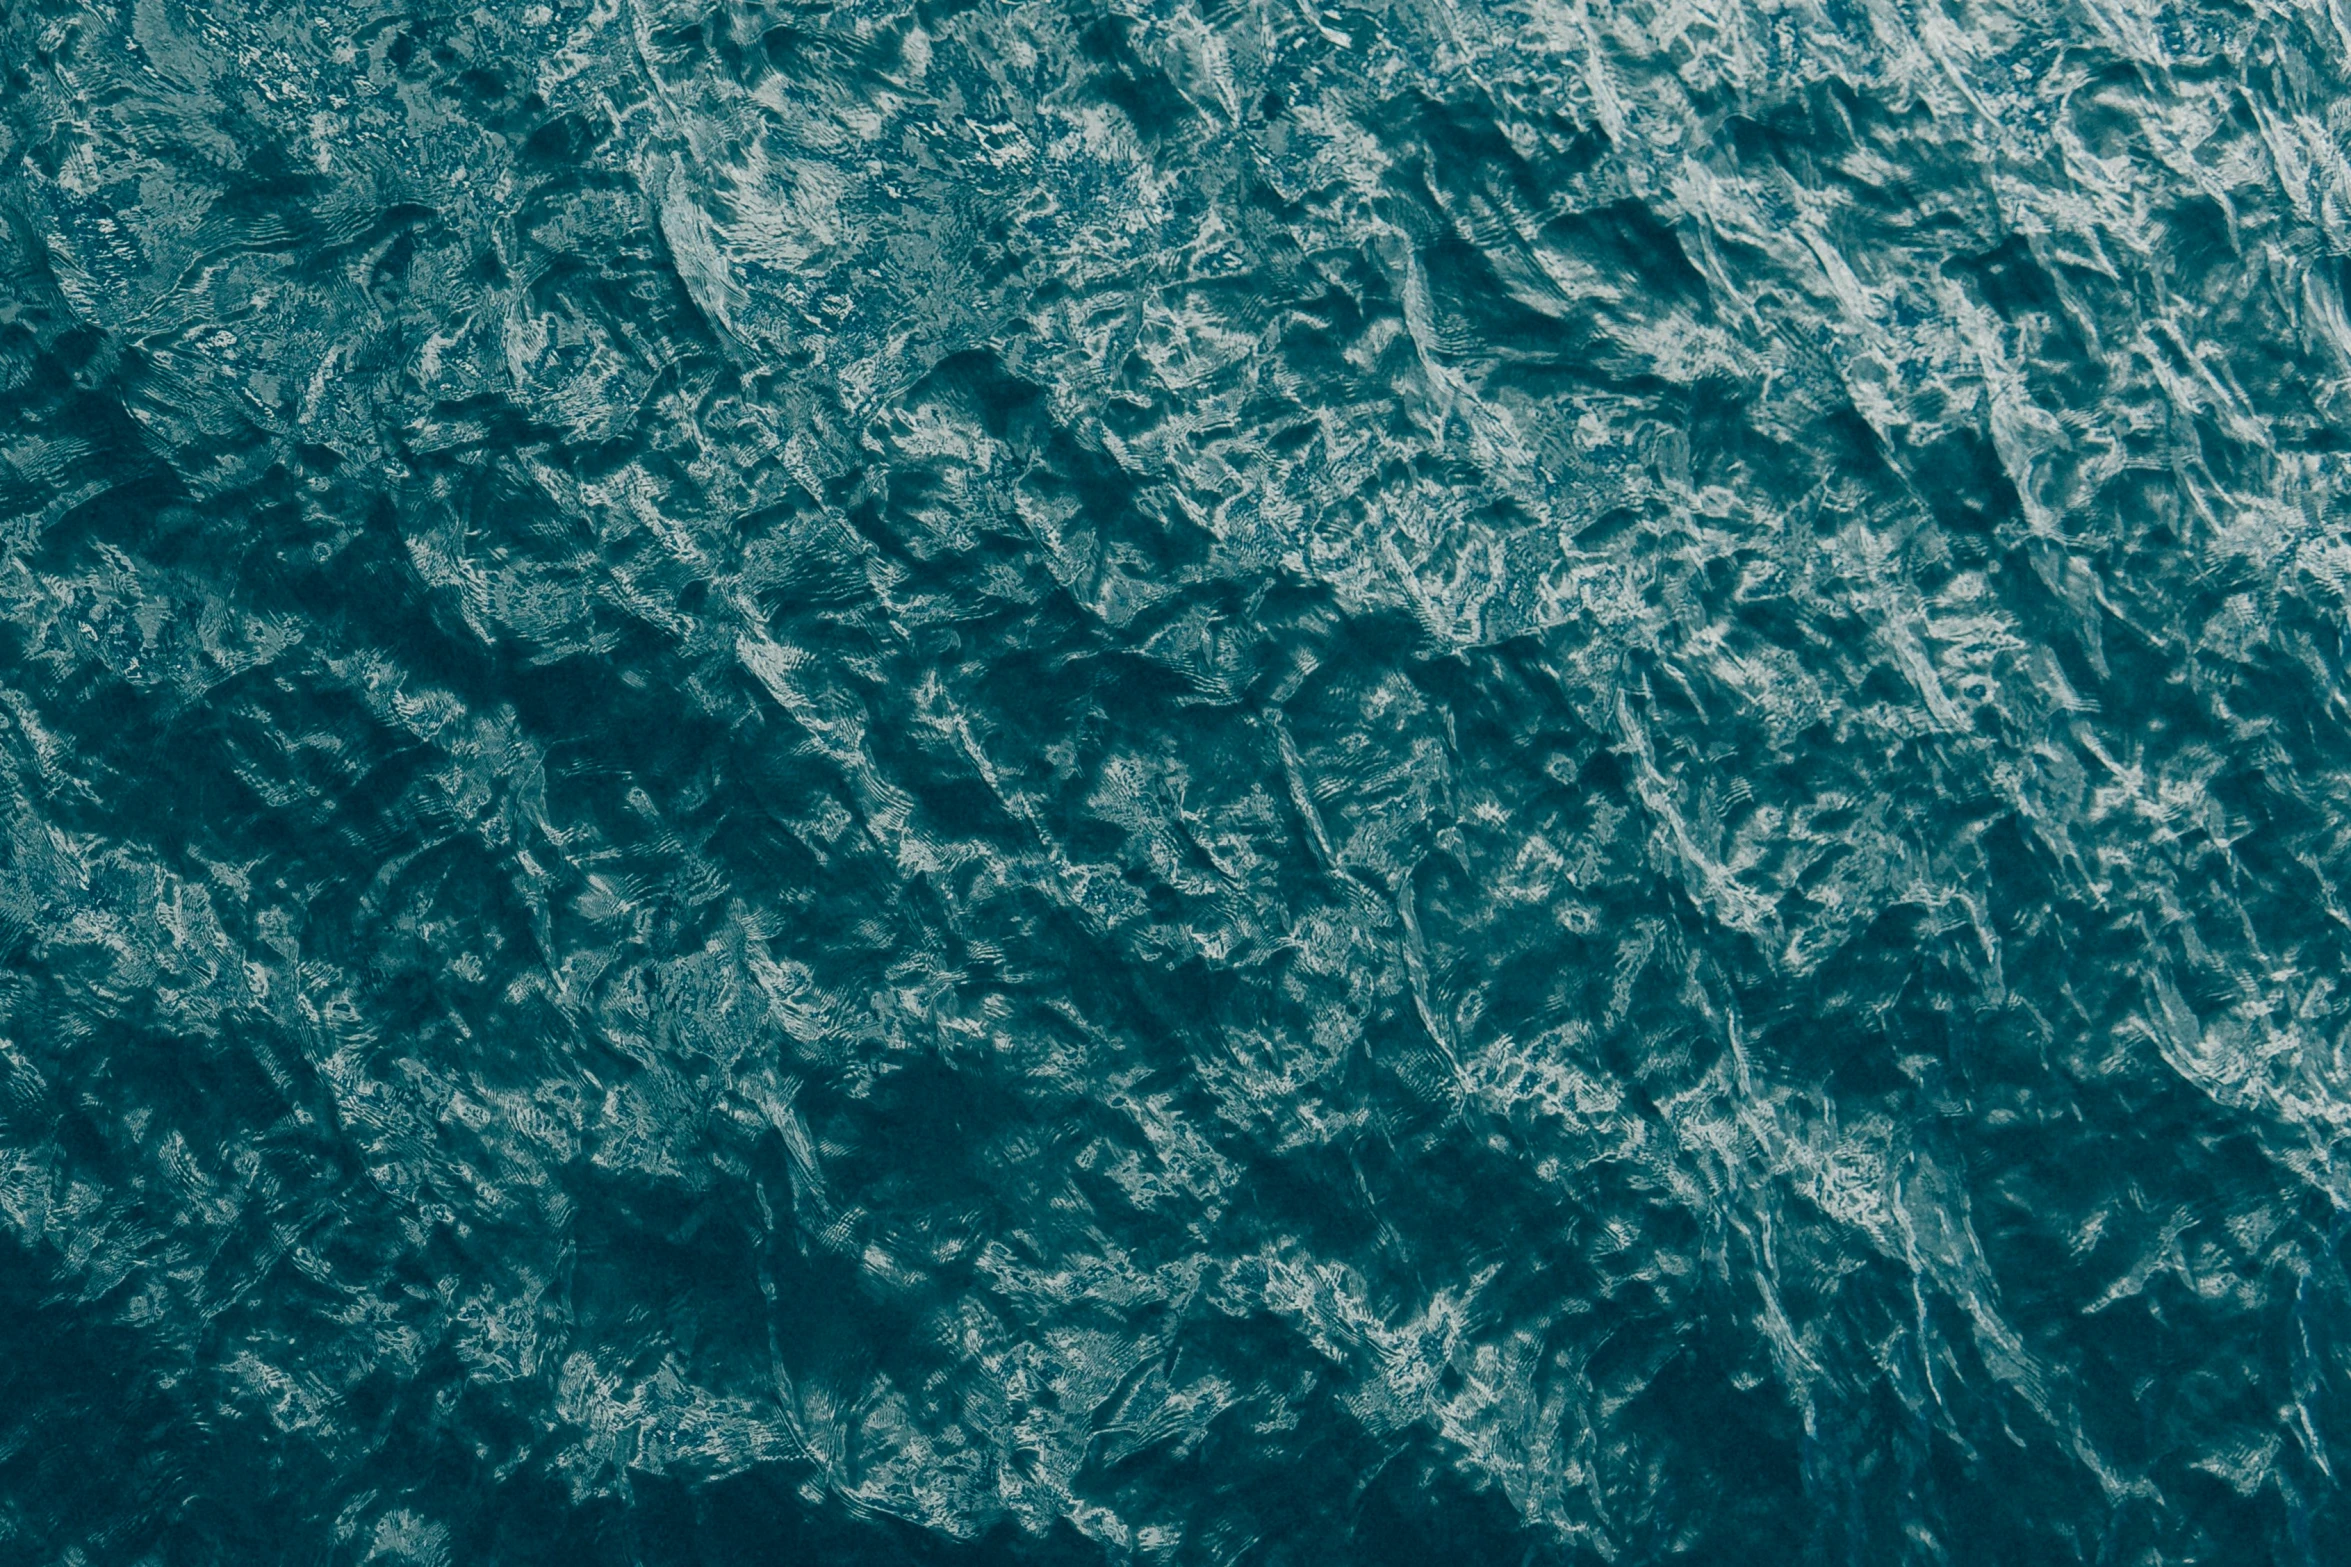 a close - up view of the ocean's water